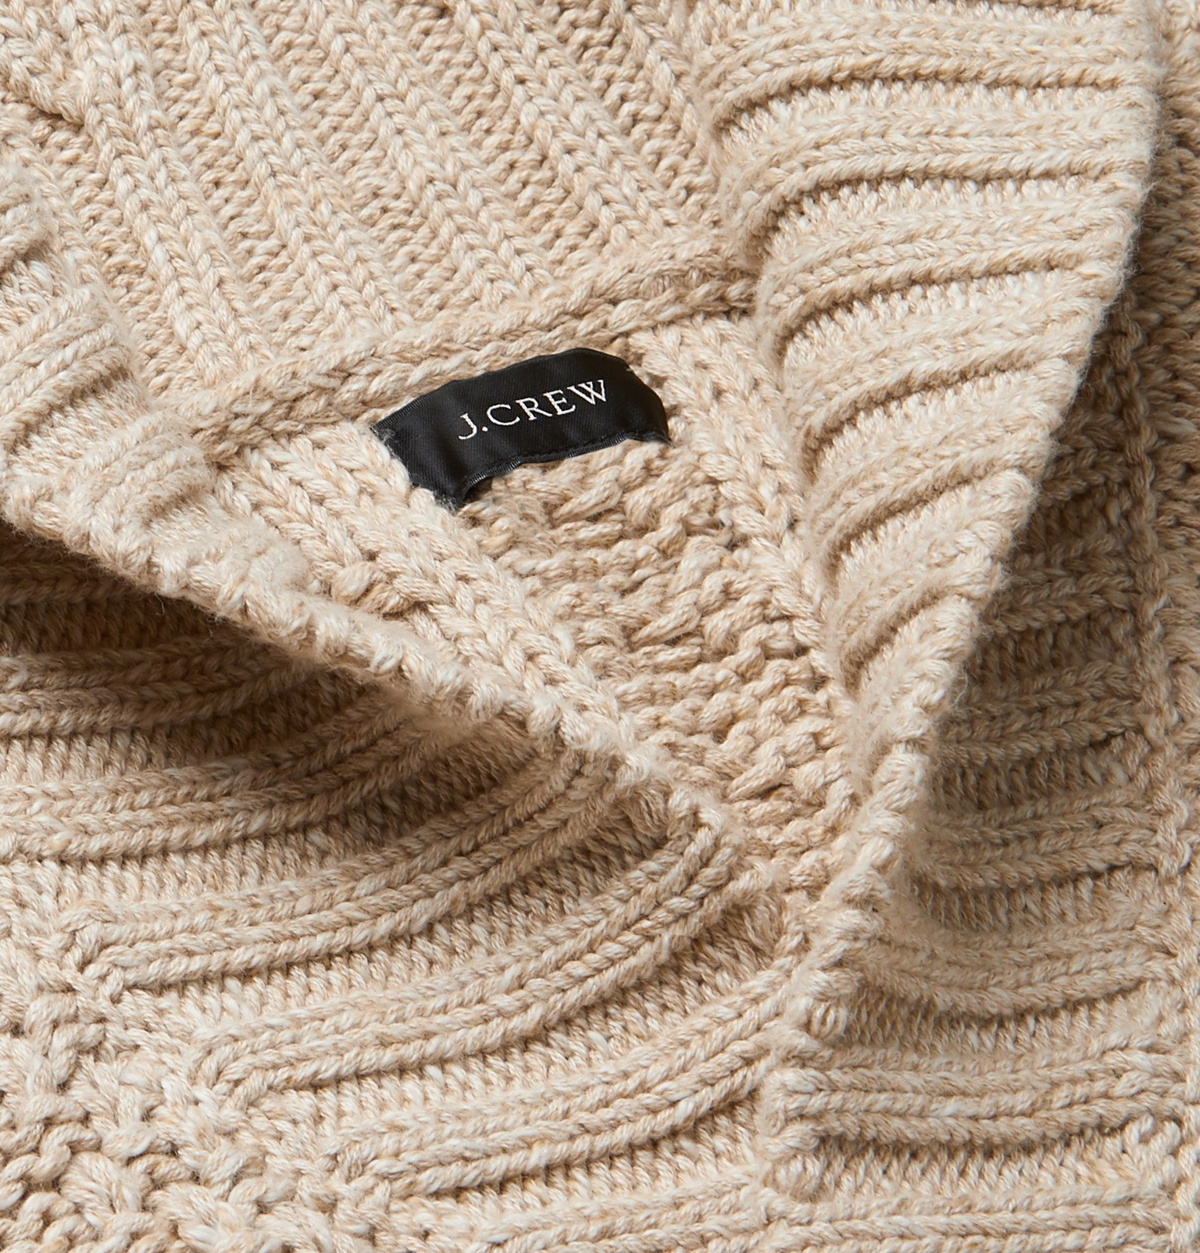 J. CREW Mens Sweater Cable-Knit Shawl Collar Cardigan Cotton Dusty